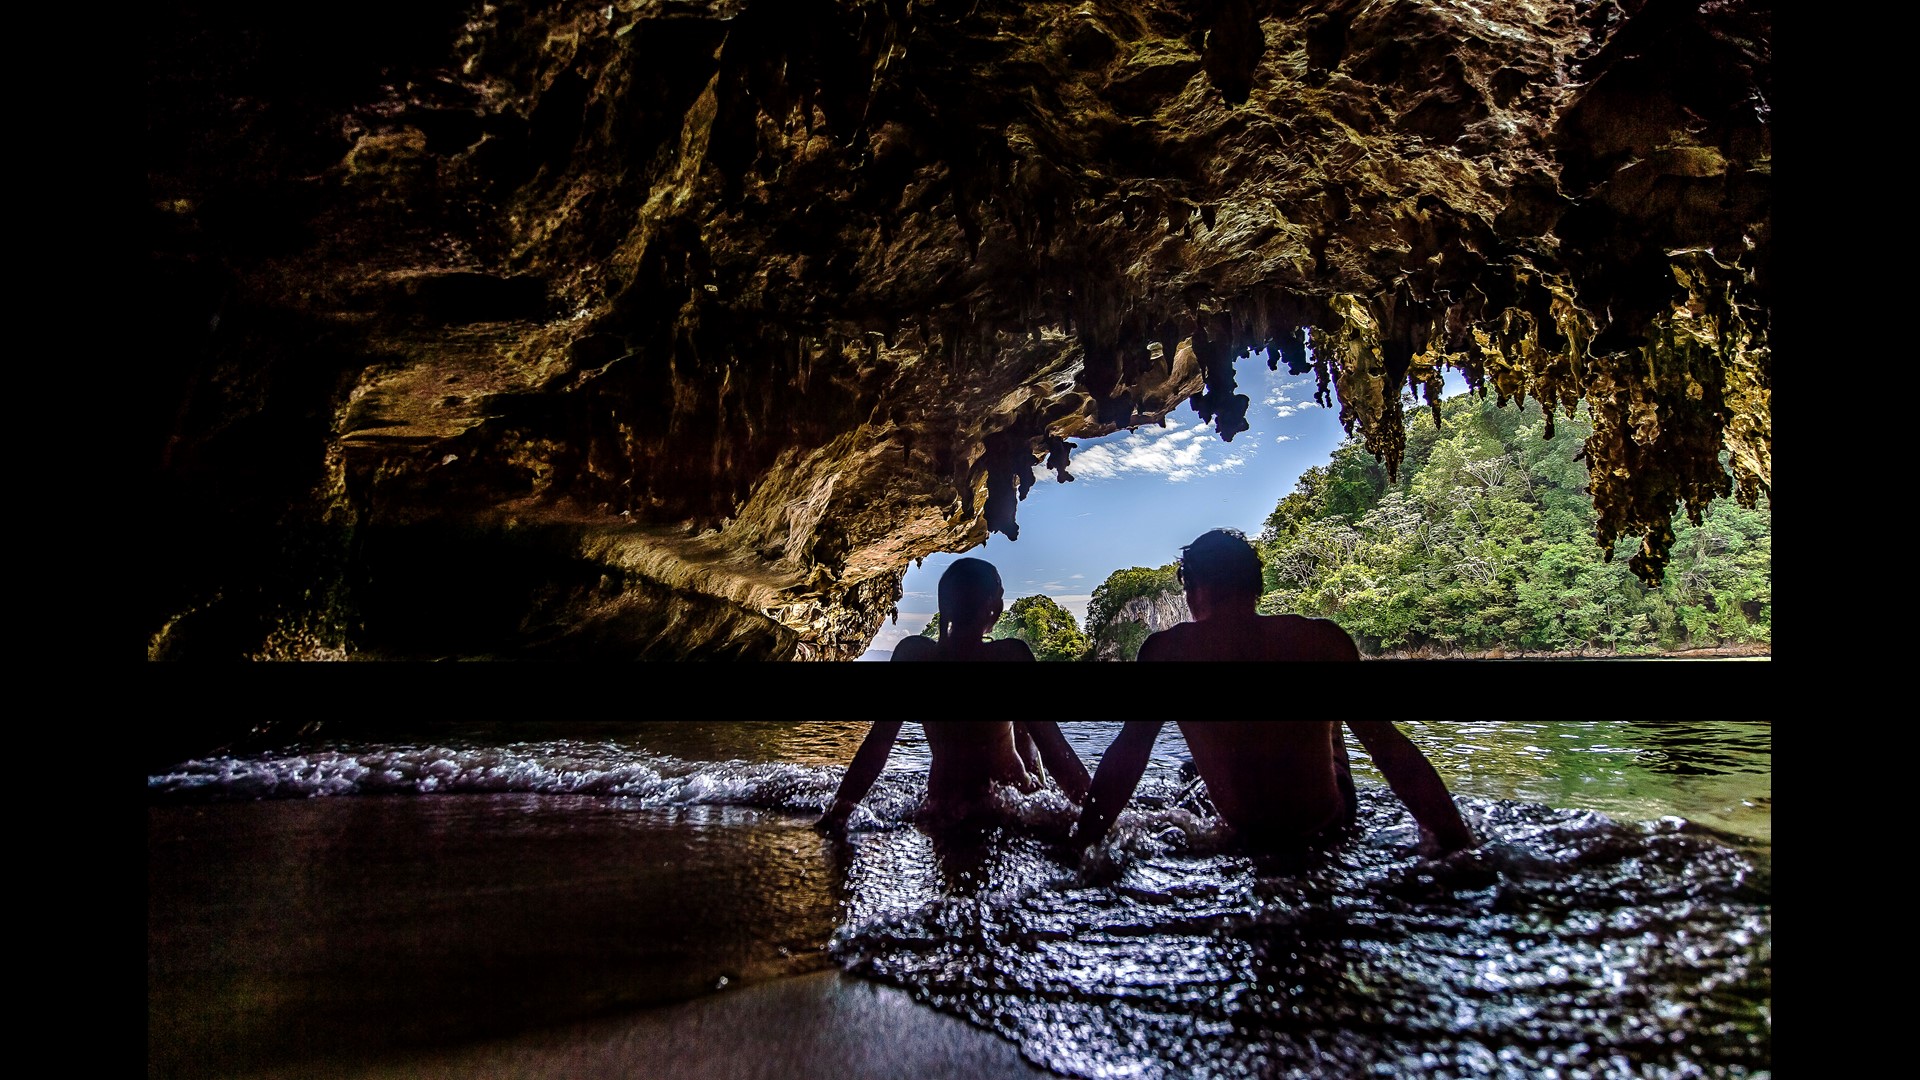 Caribbean hidden gem: Unspoiled Samaná shows another side of Dominican